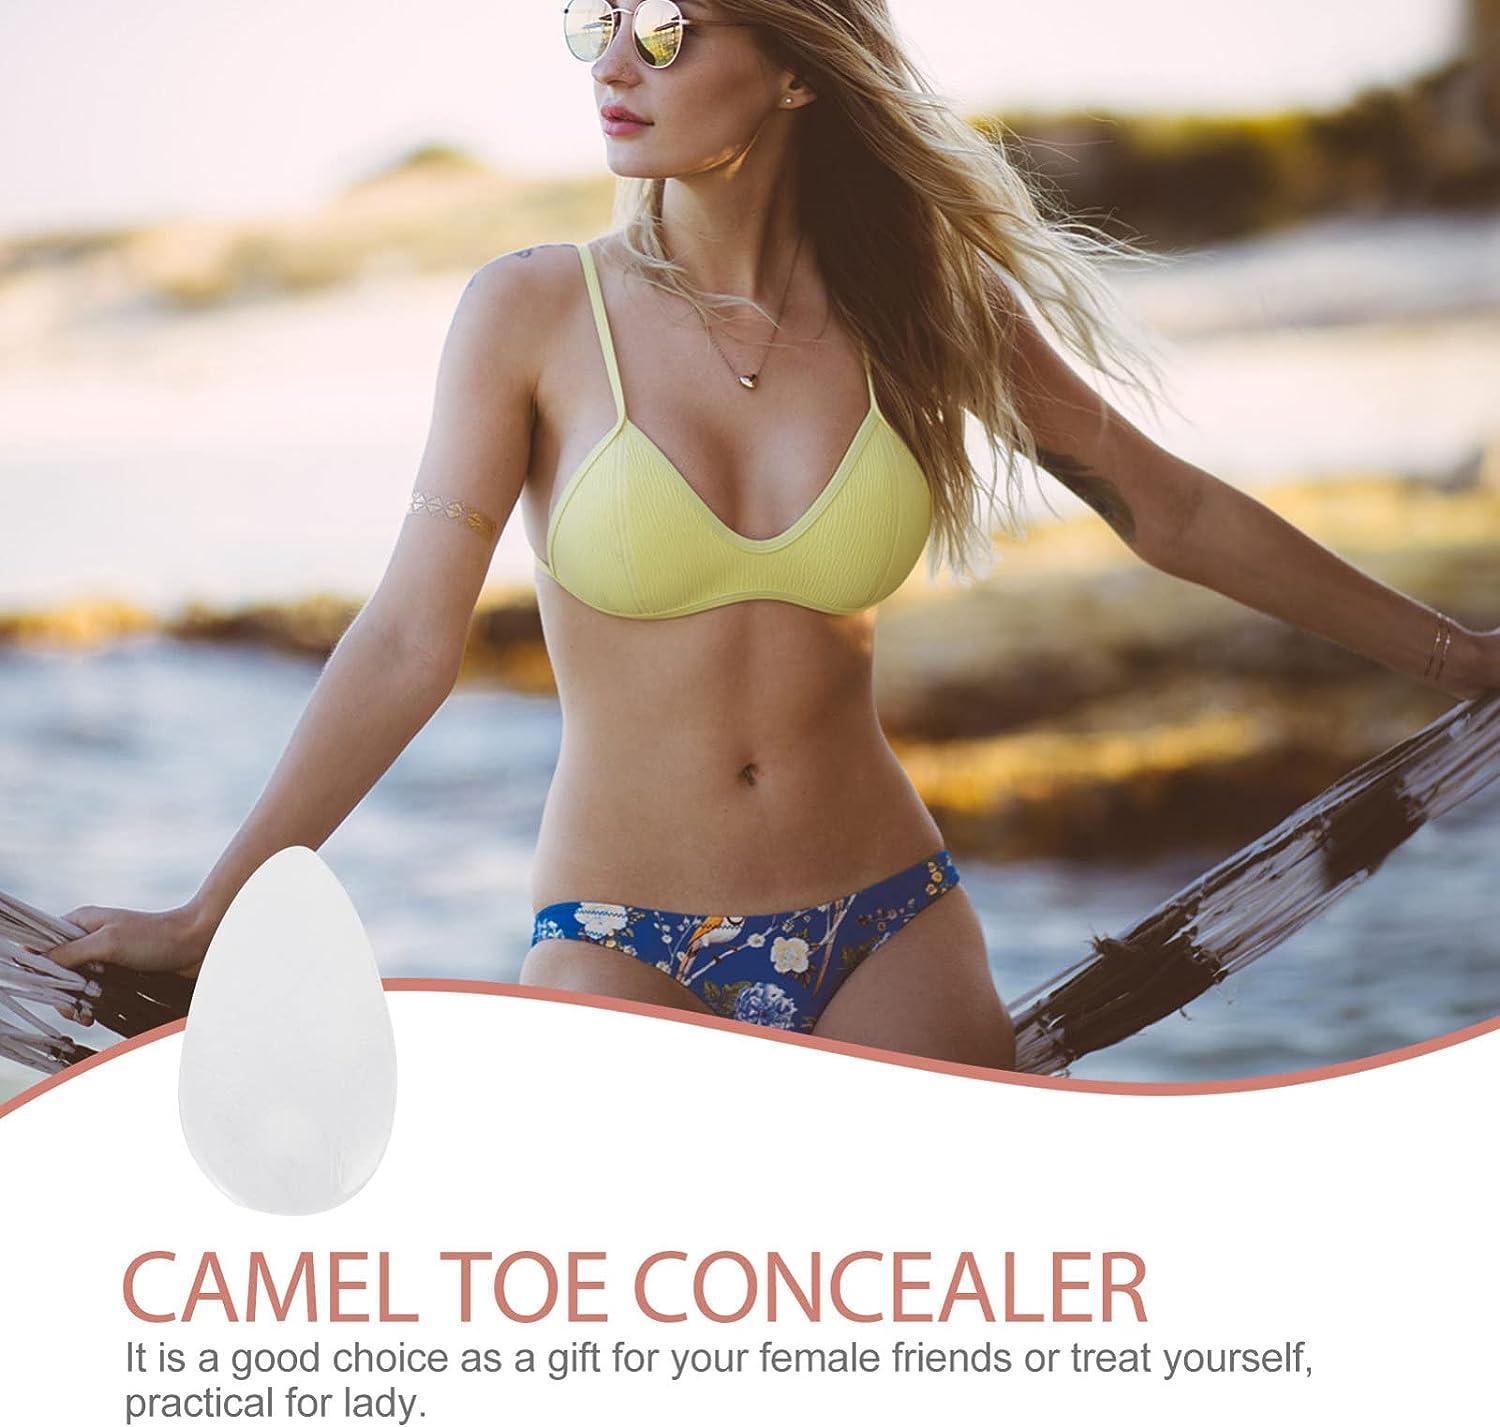 ashley printup recommends camel toed women images bikini pic